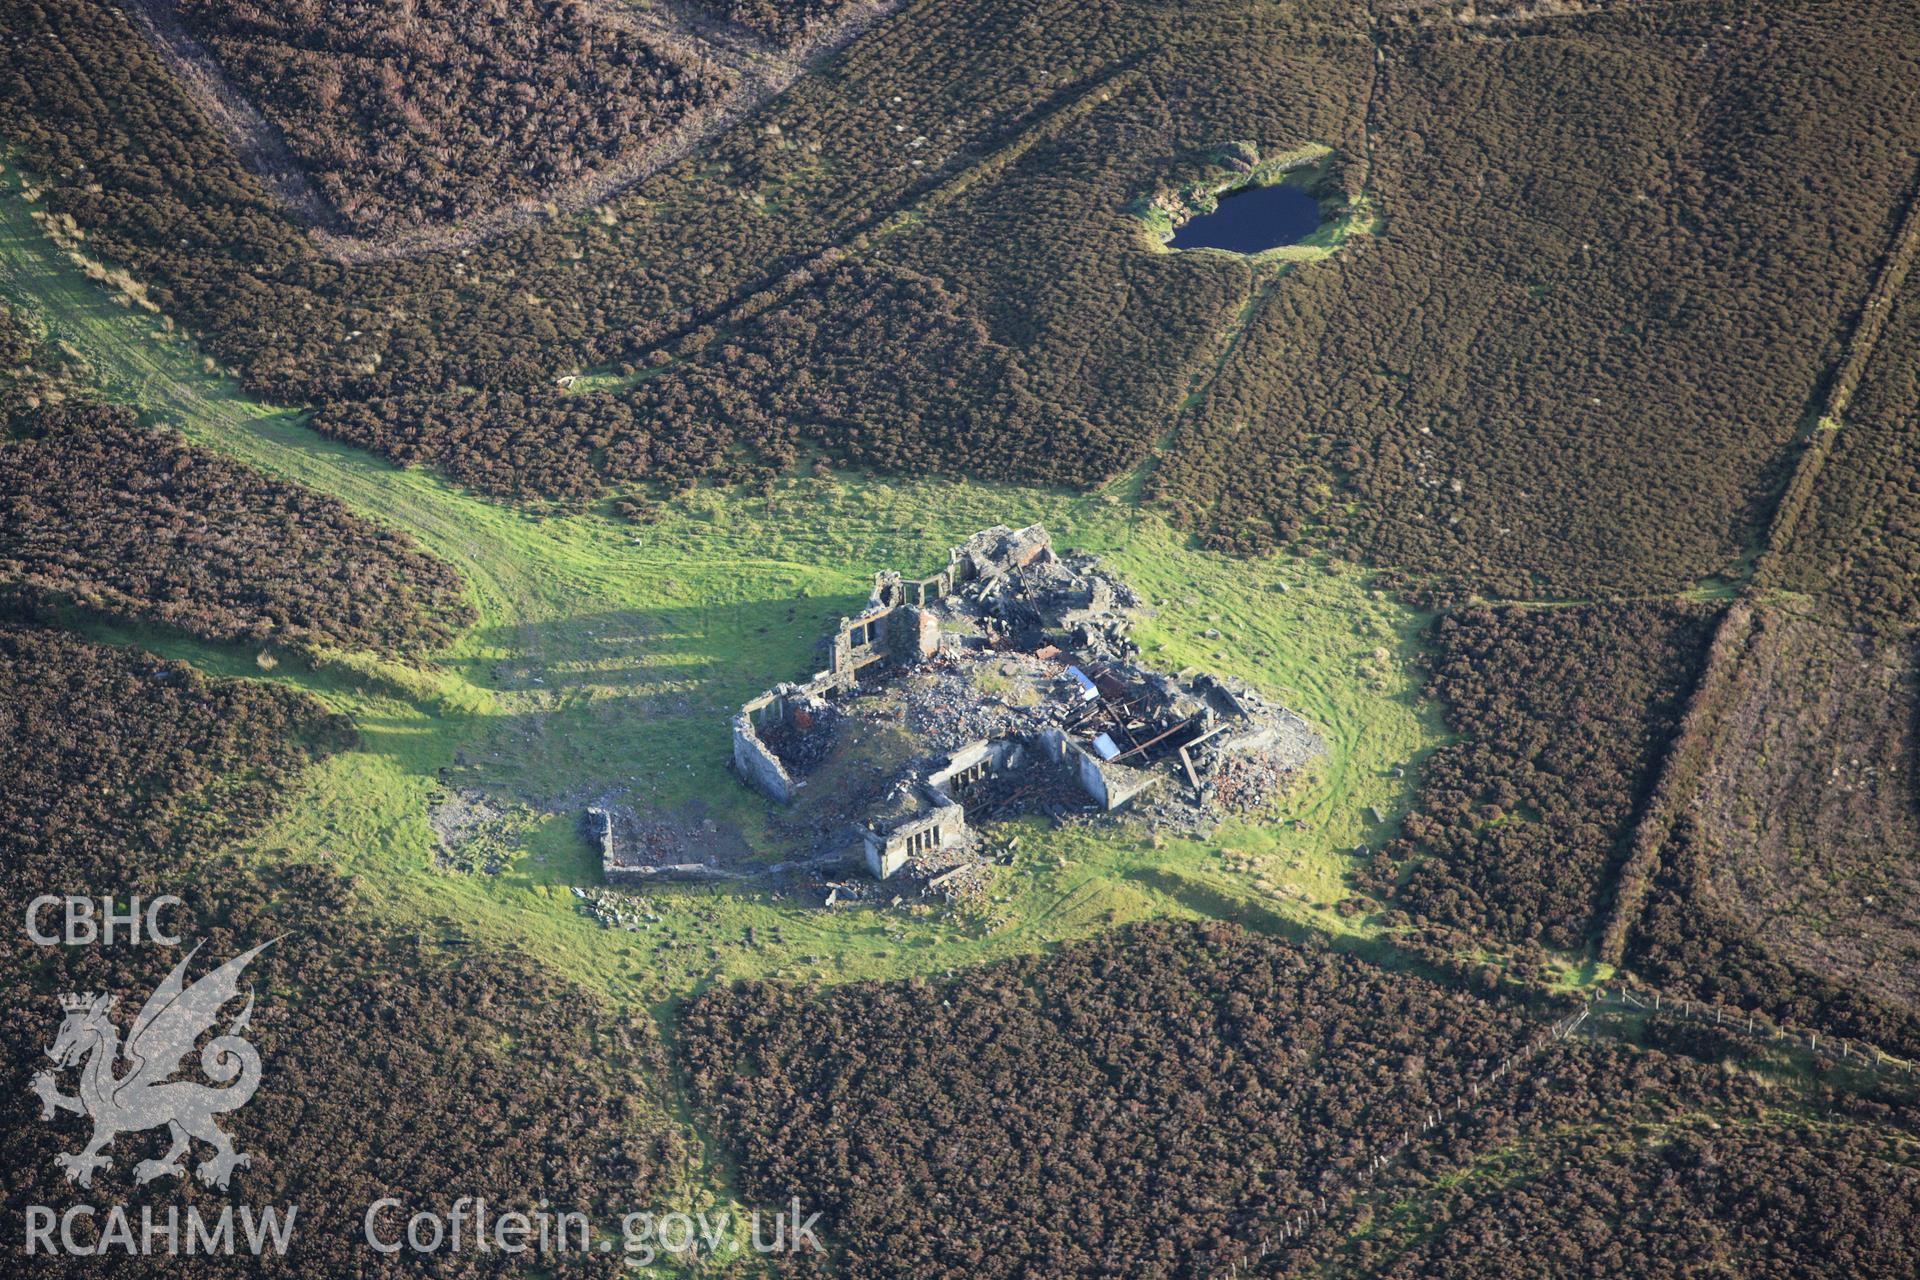 RCAHMW colour oblique aerial photograph of Gwylfa Hiraethog Shooting Lodge, in ruins. Taken on 10 December 2009 by Toby Driver